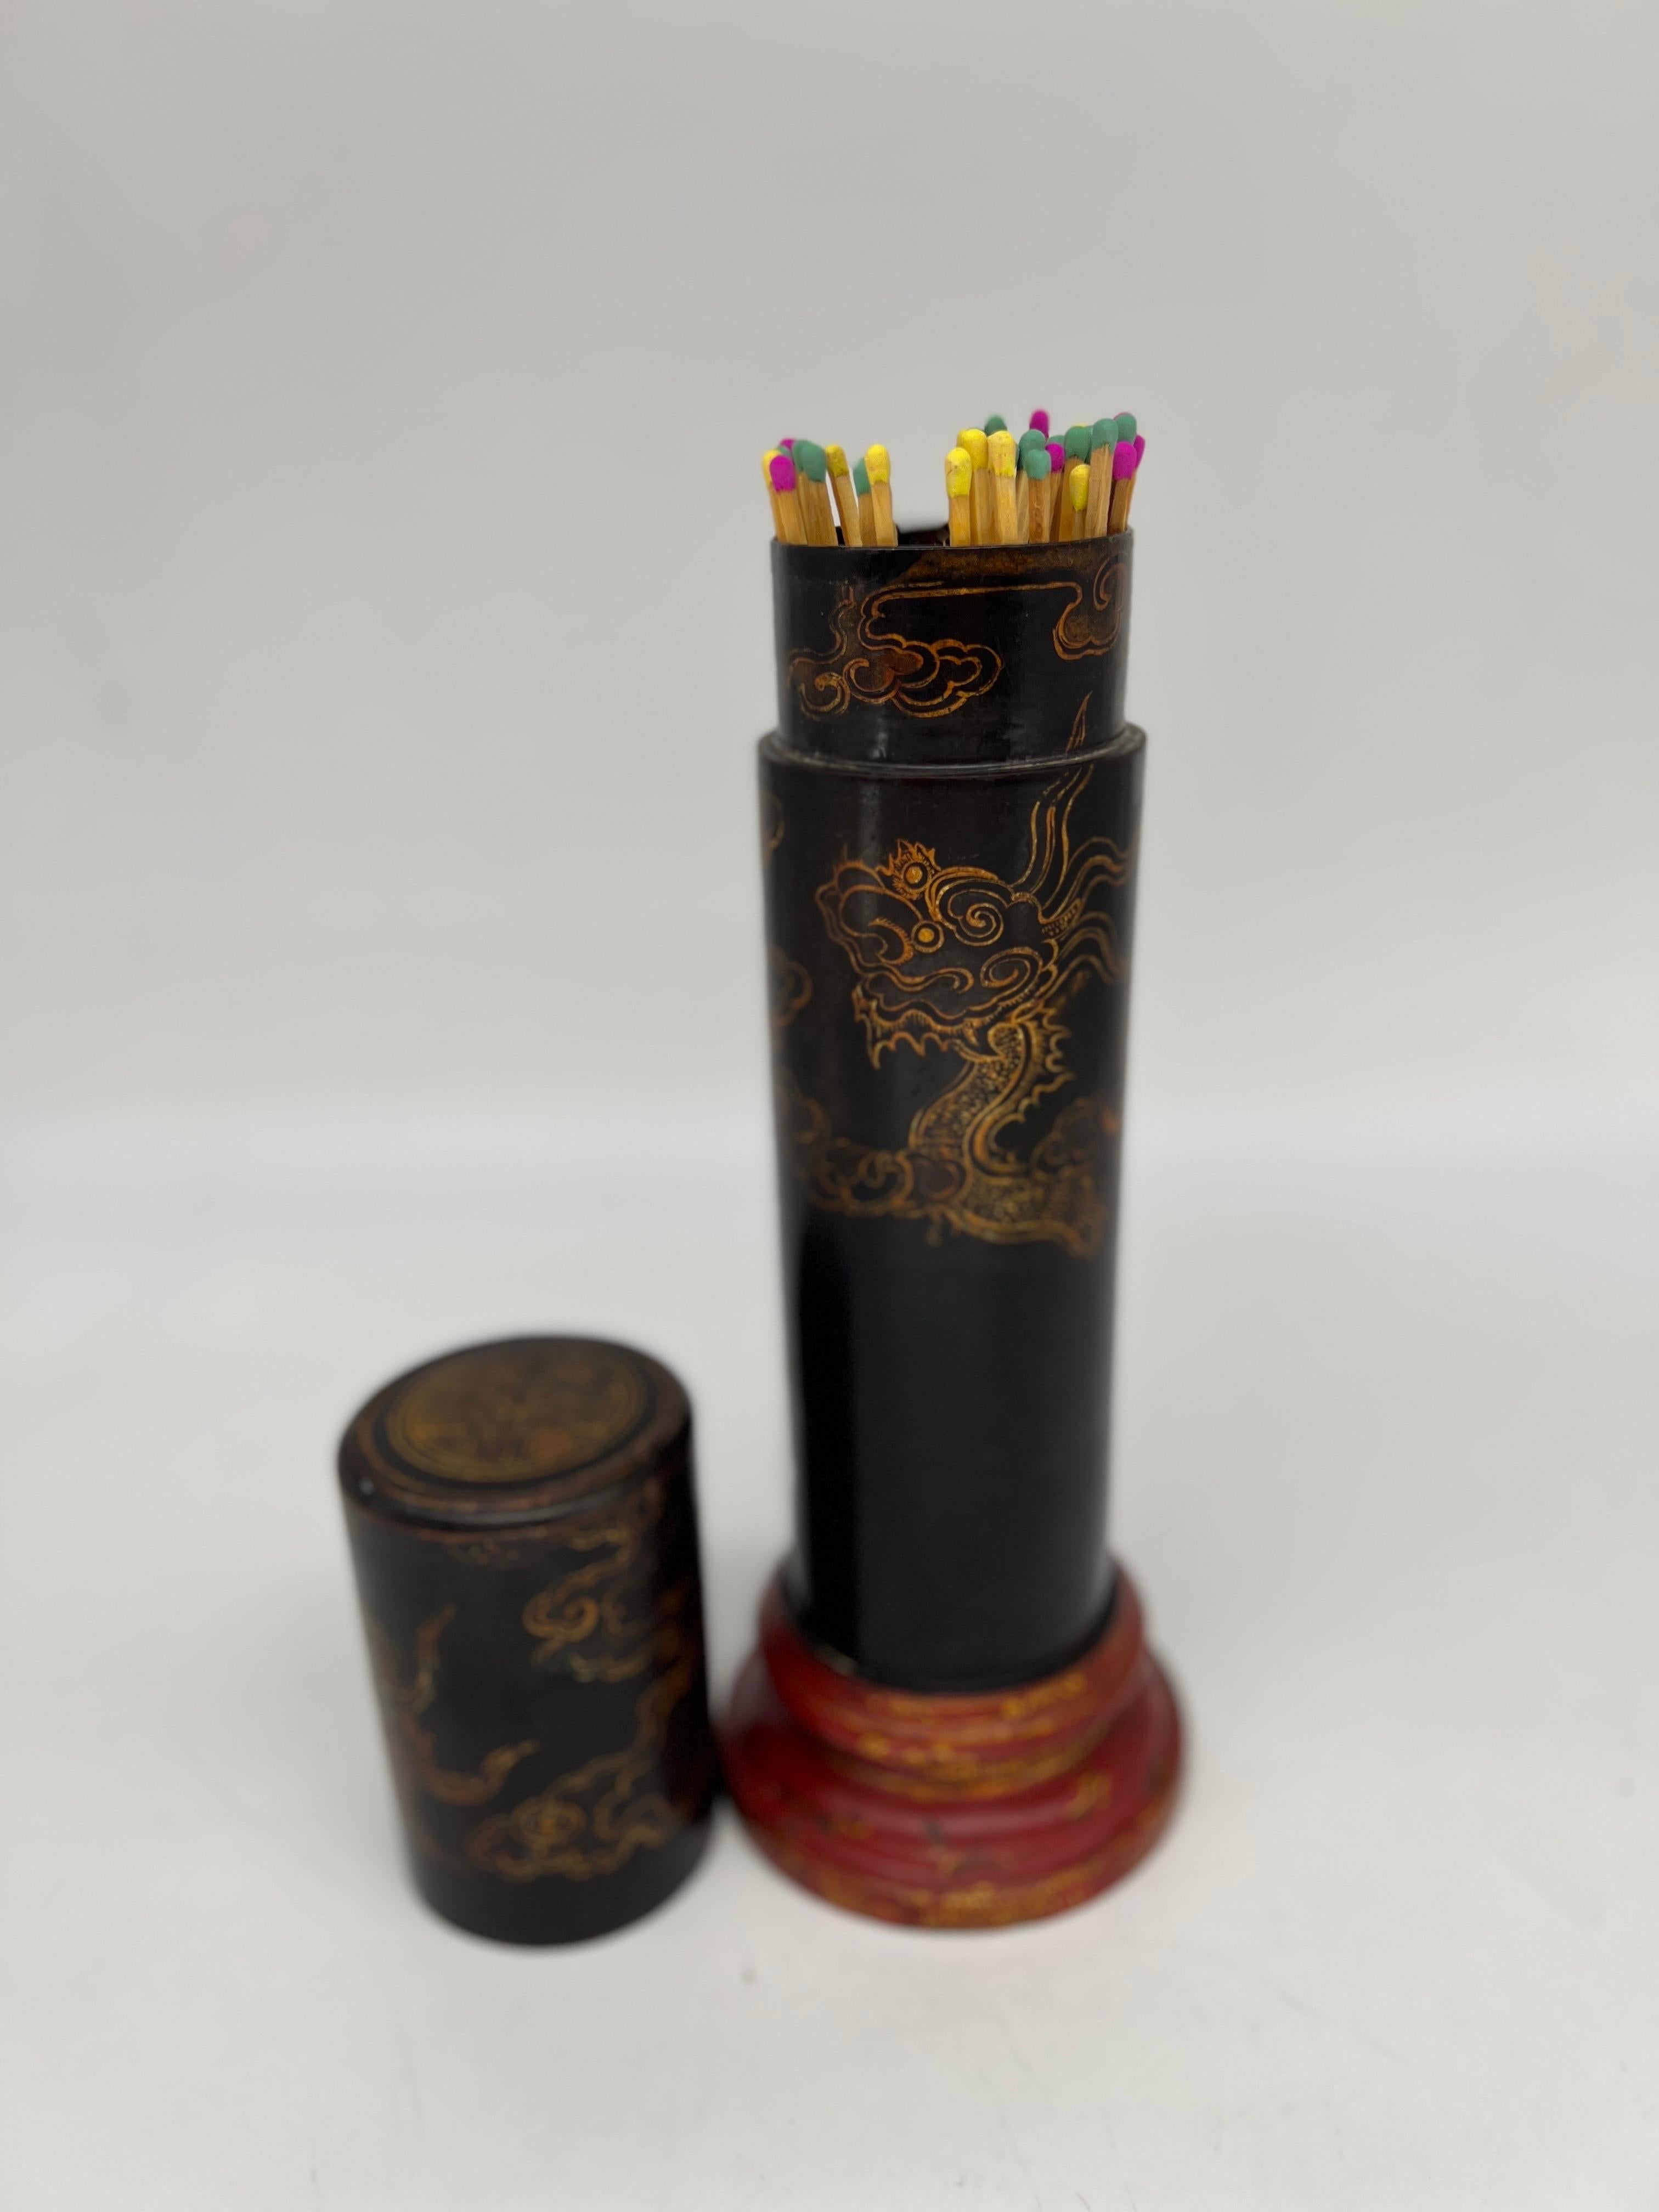 Vintage Japanese Lacquerware Cylindrical Fireplace Matchstrike Box For Sale 6